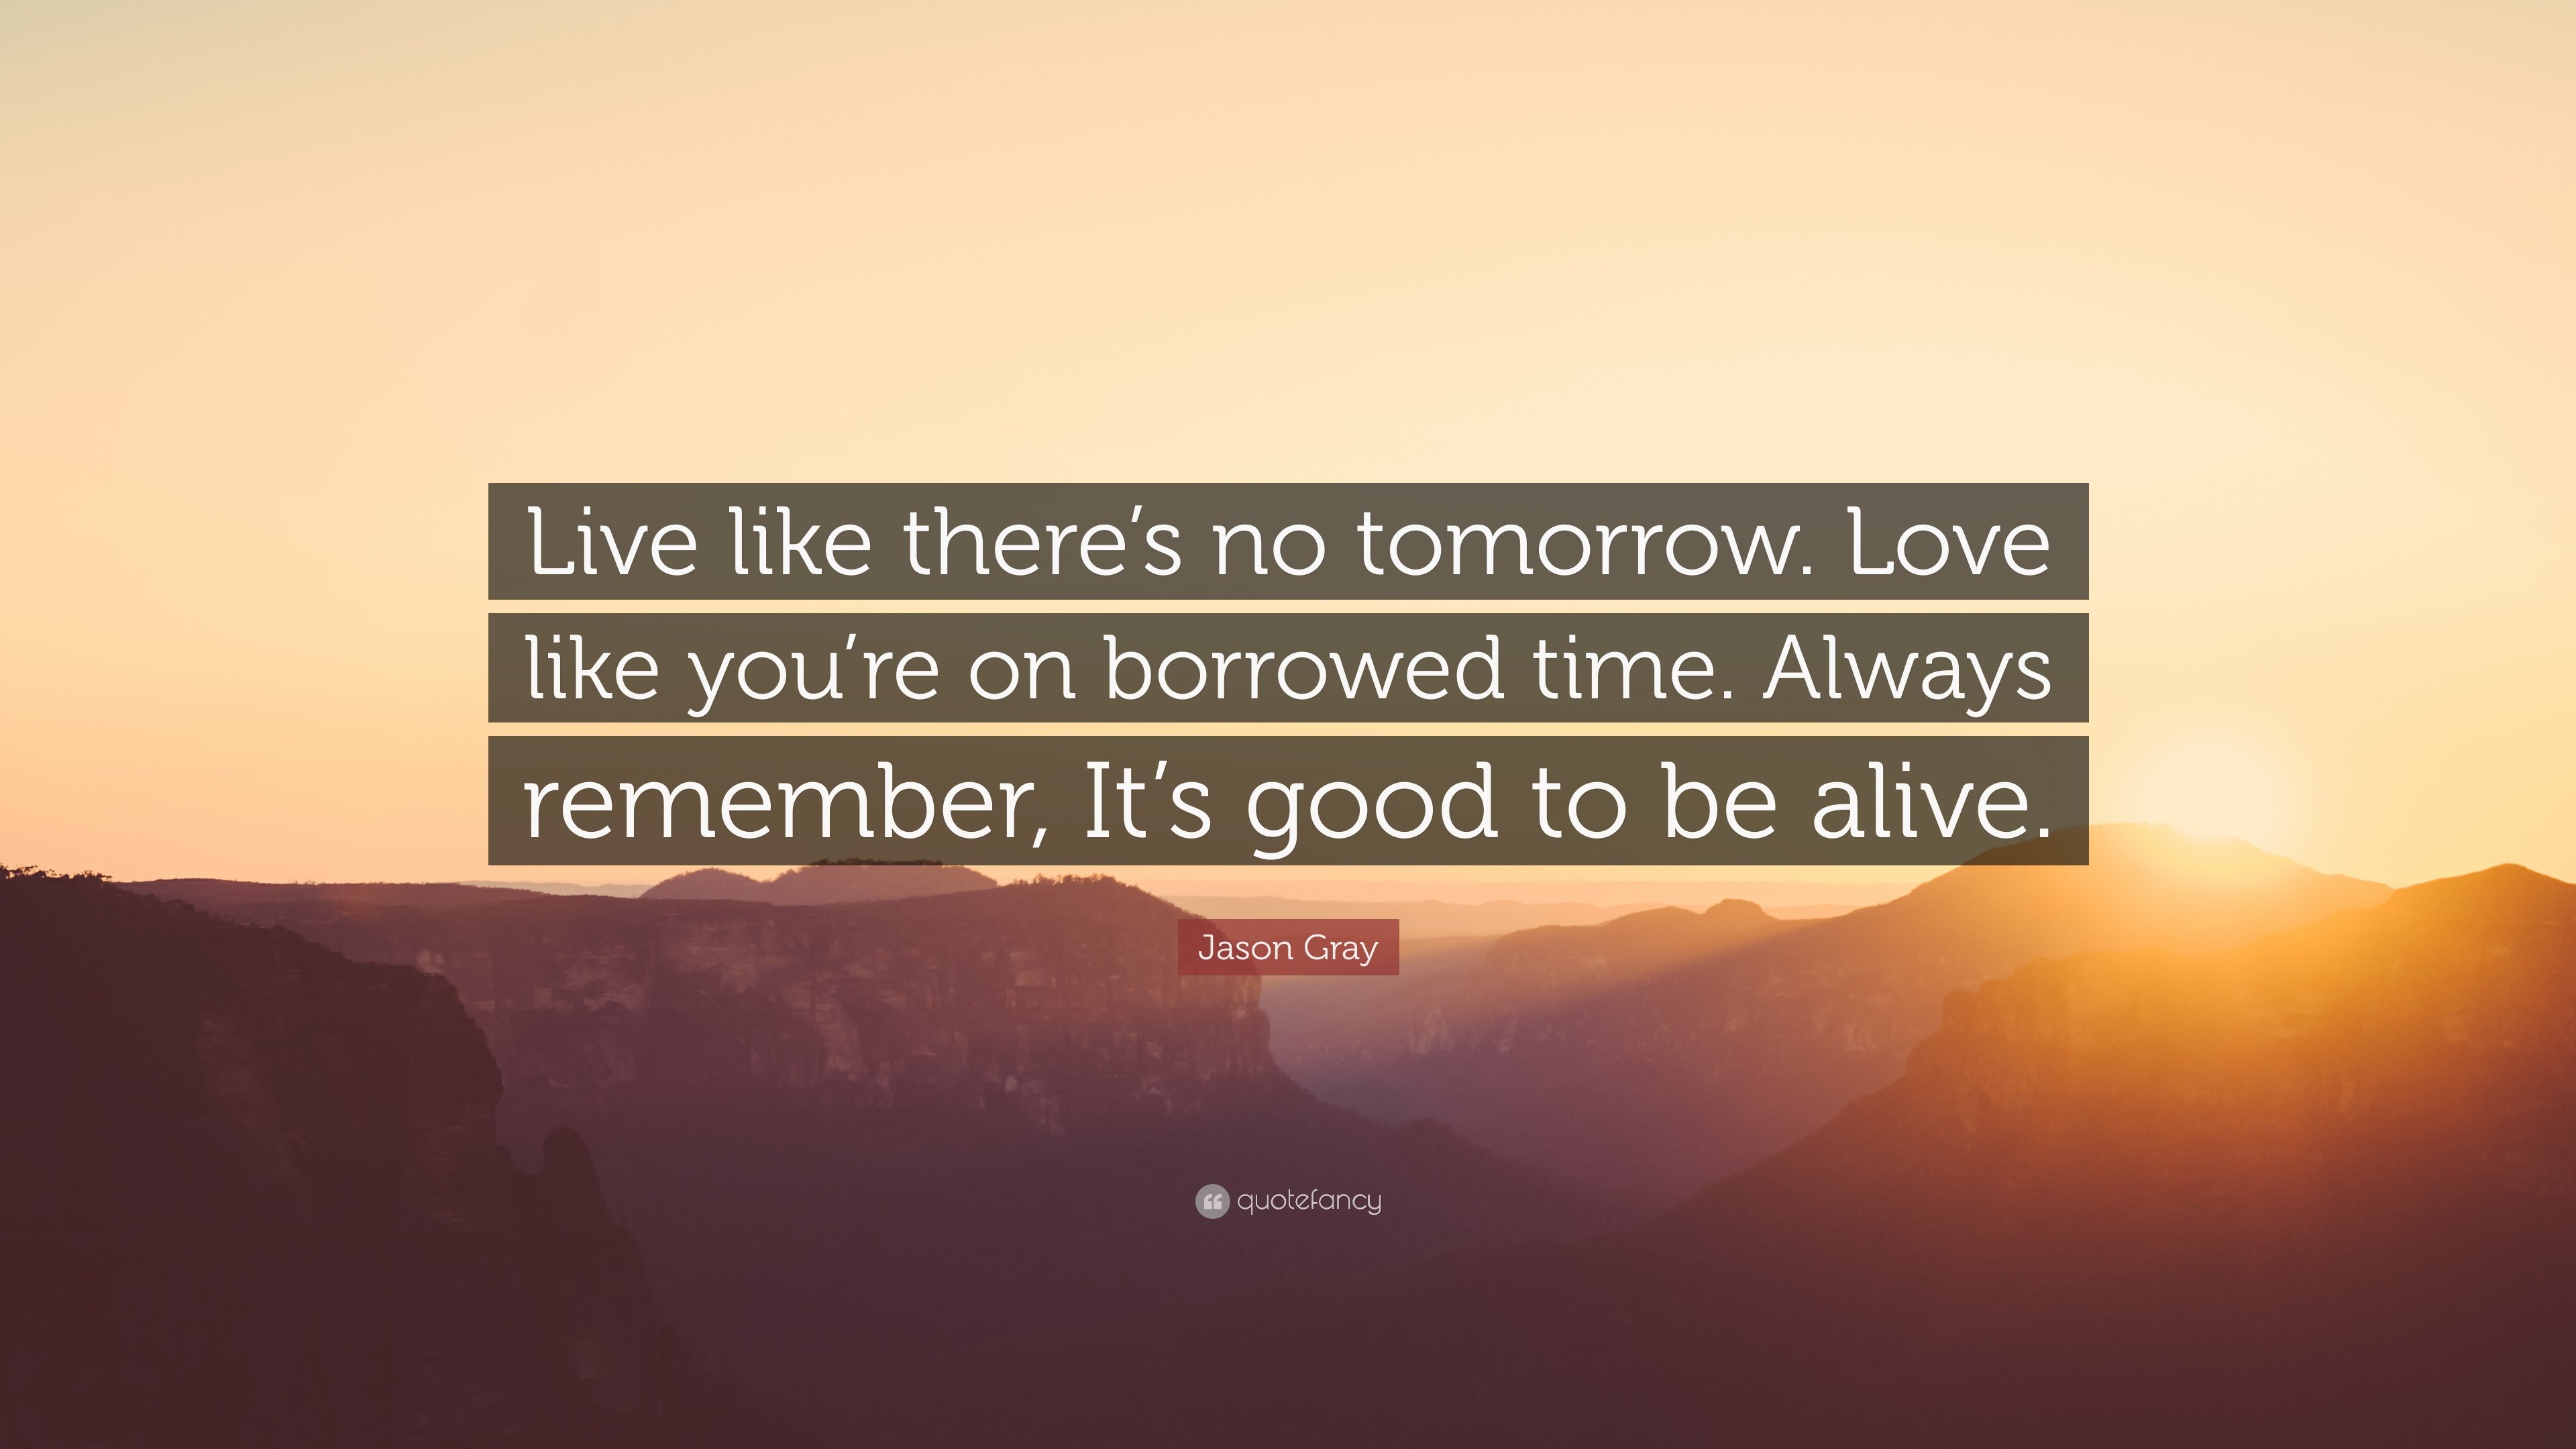 Jason Gray Quote: “Live like there's no tomorrow. Love like you're on borrowed time. Always